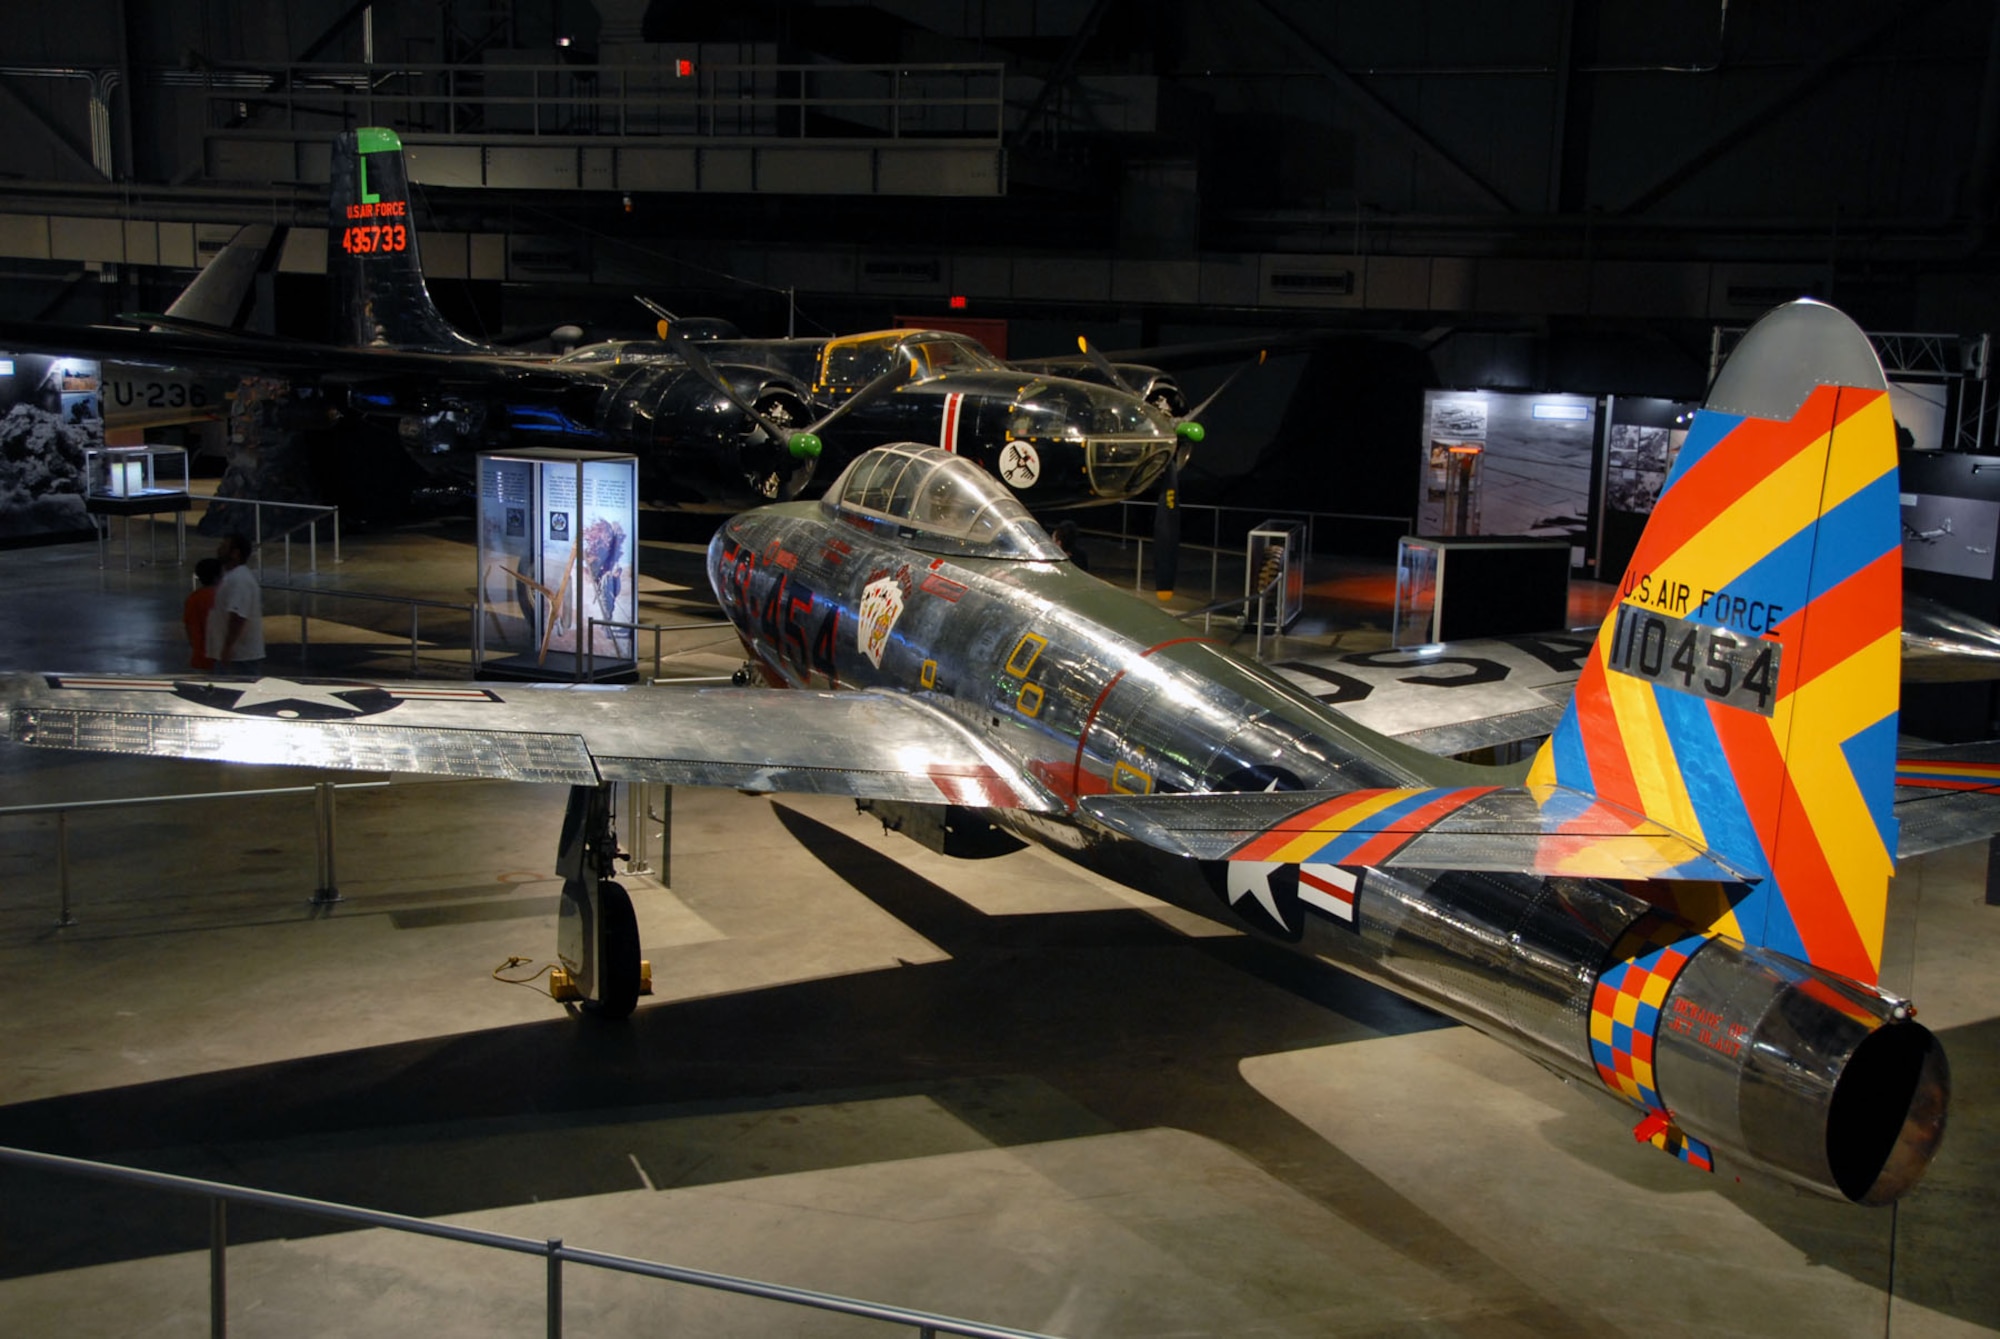 DAYTON, Ohio -- Republic F-84 on display in the Korean War Gallery at the National Museum of the U.S. Air Force. (U.S. Air Force photo)